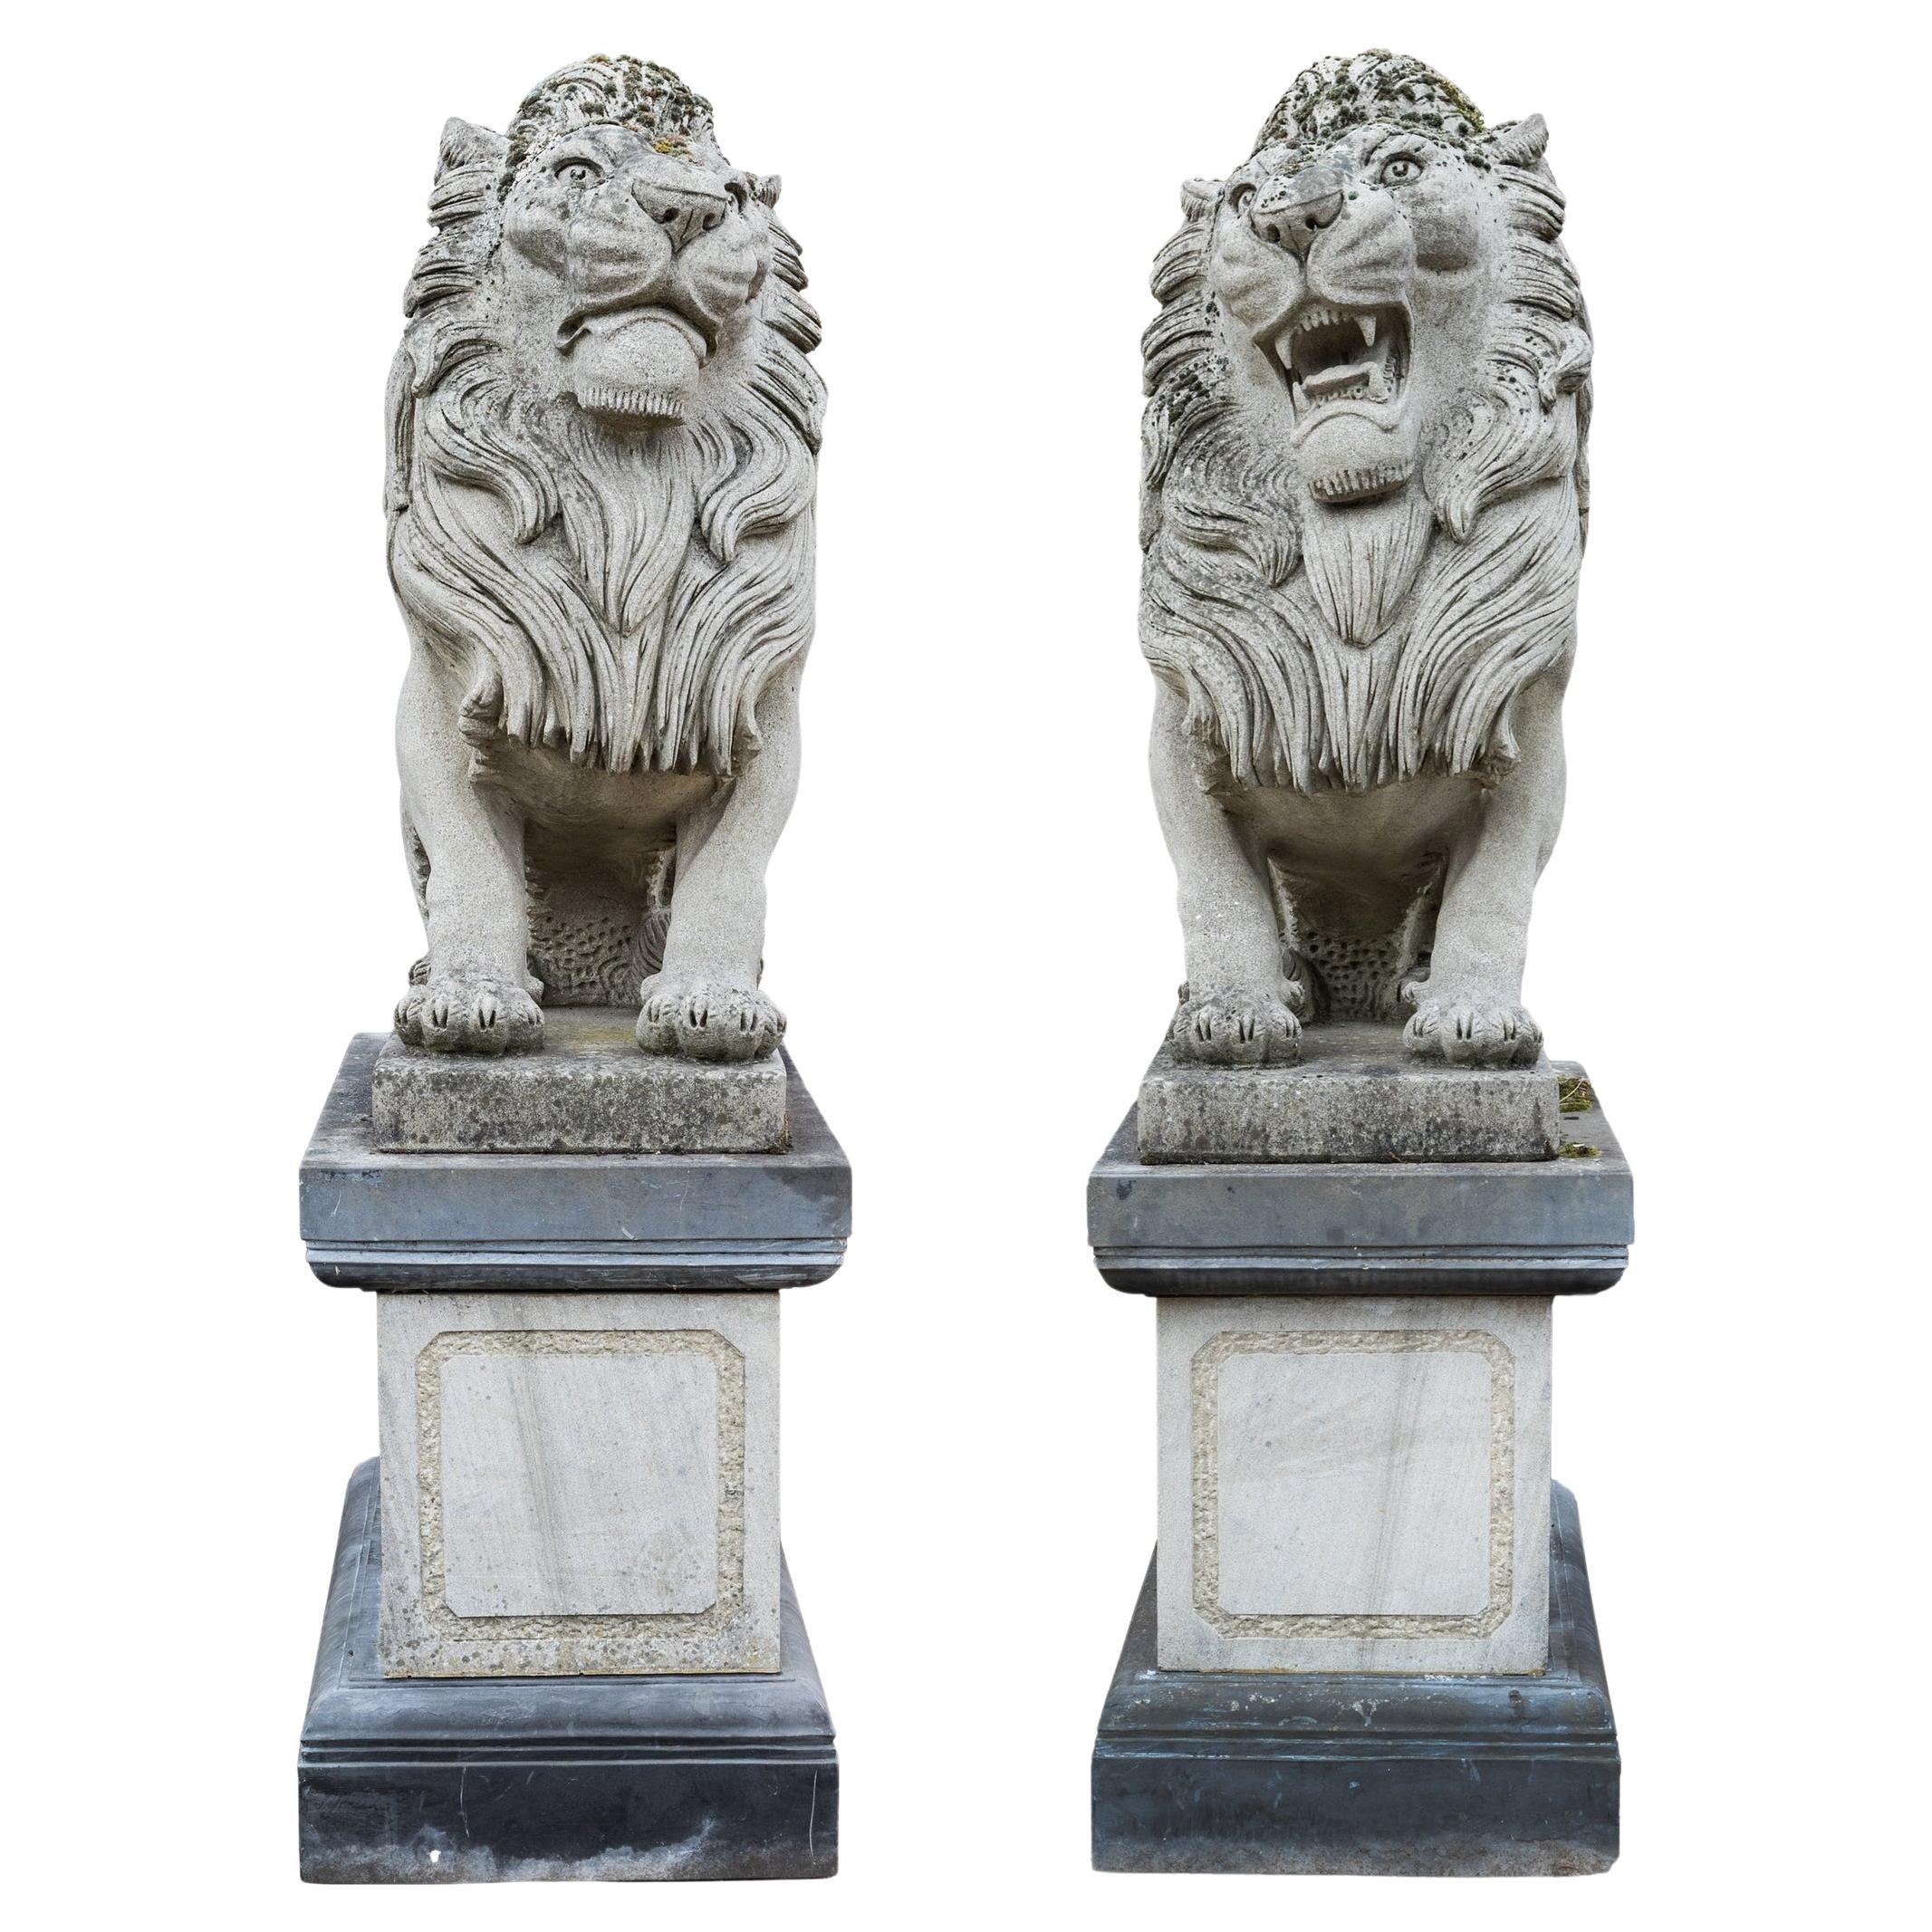 Reclaimed Pair of Monumental Stone Lions on their own Plinth